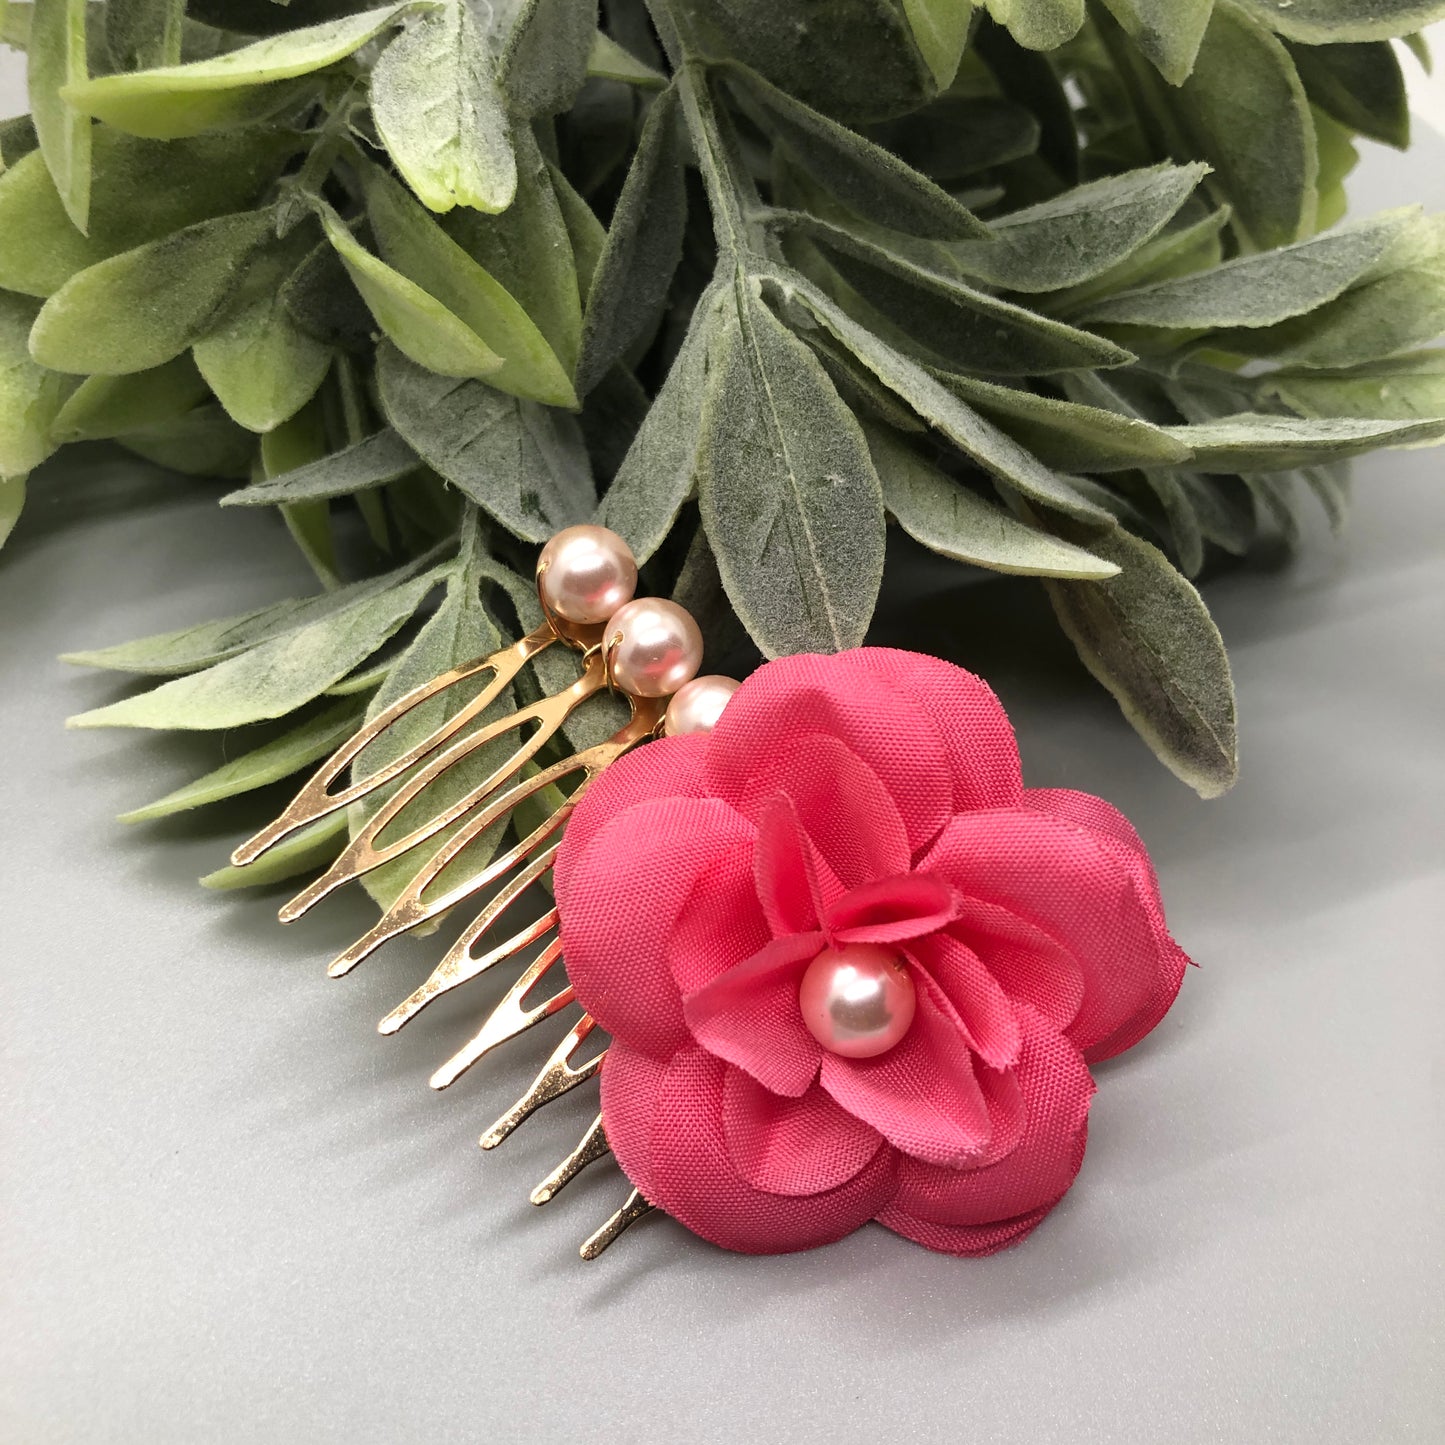 Pink Flower Baby Pink Beads 2.0' Metal Side Comb Retro Vintage Style 1 pc